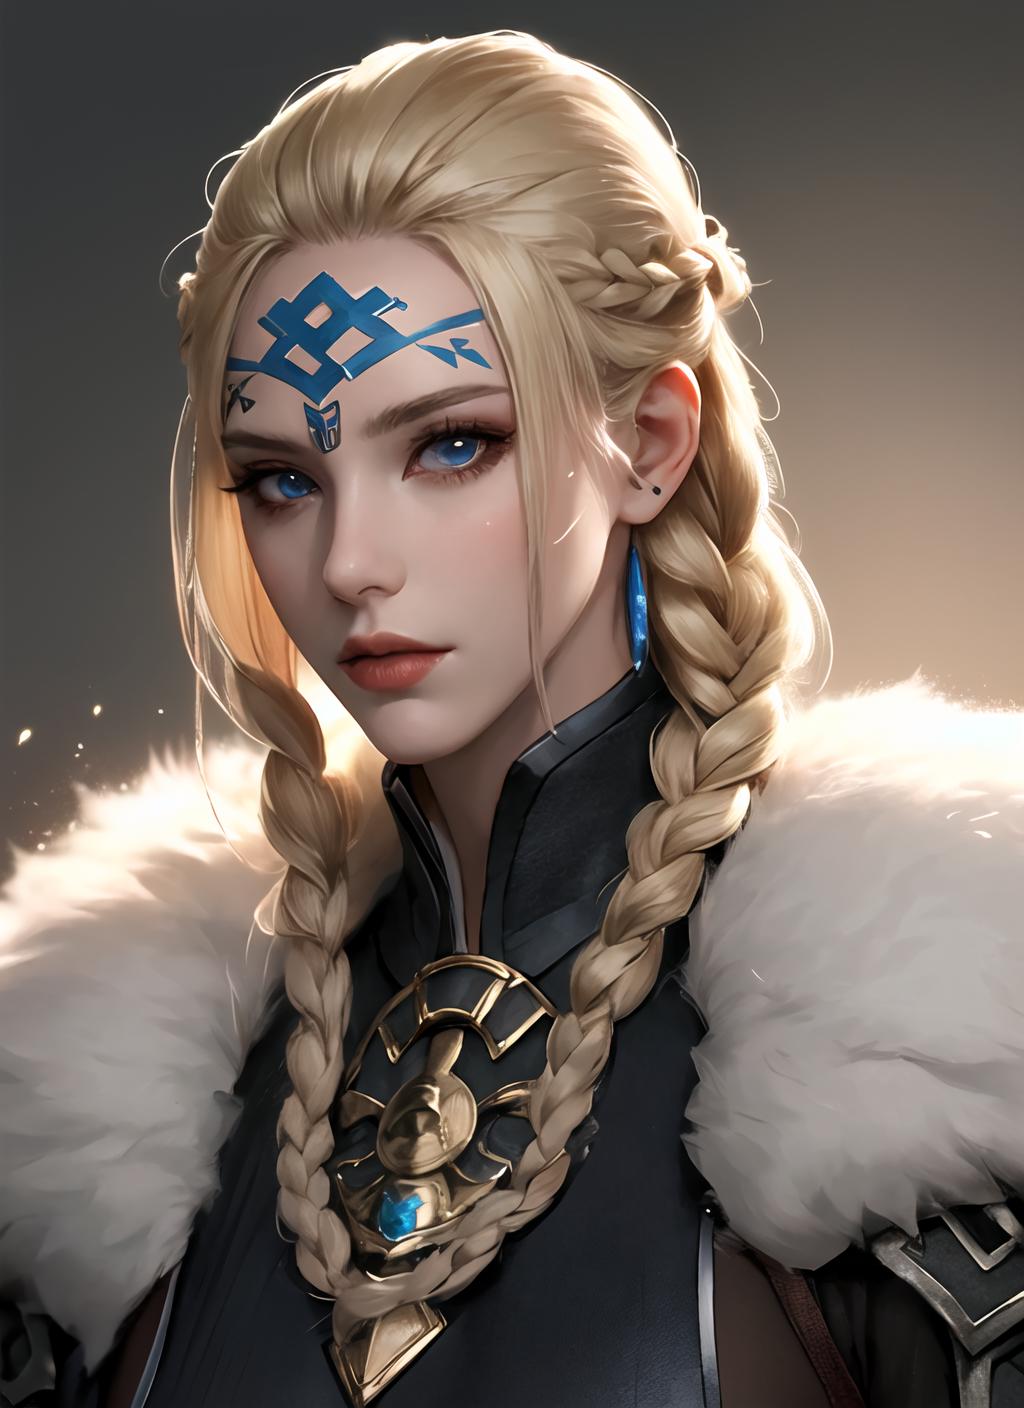 A woman with long blonde braids and a blue and black headband.